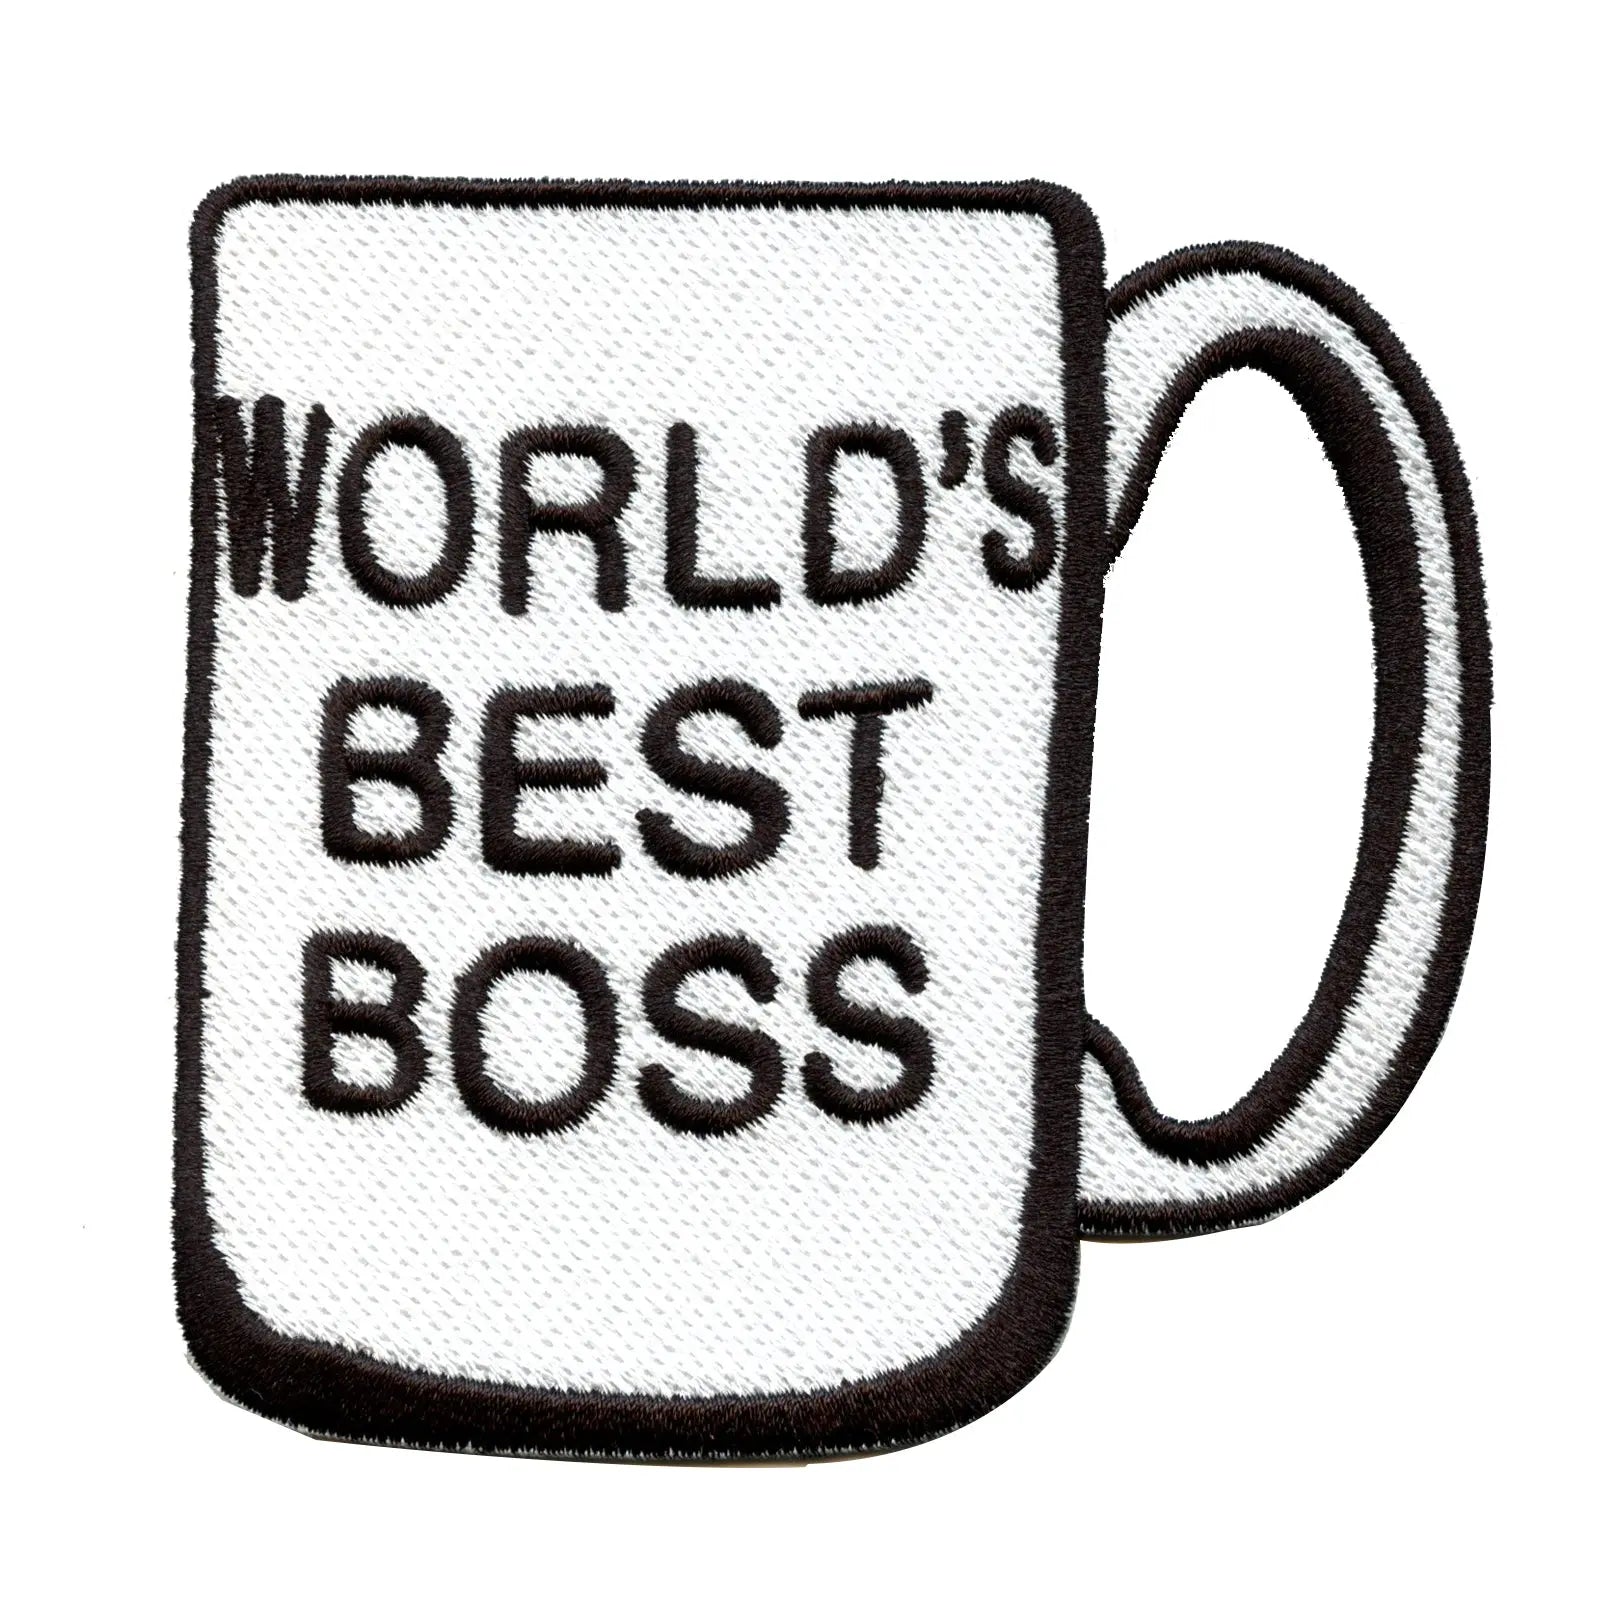 NBC The Office Michael Scott's "World's Best Boss" Coffee Mug Embroidered Iron on Patch 